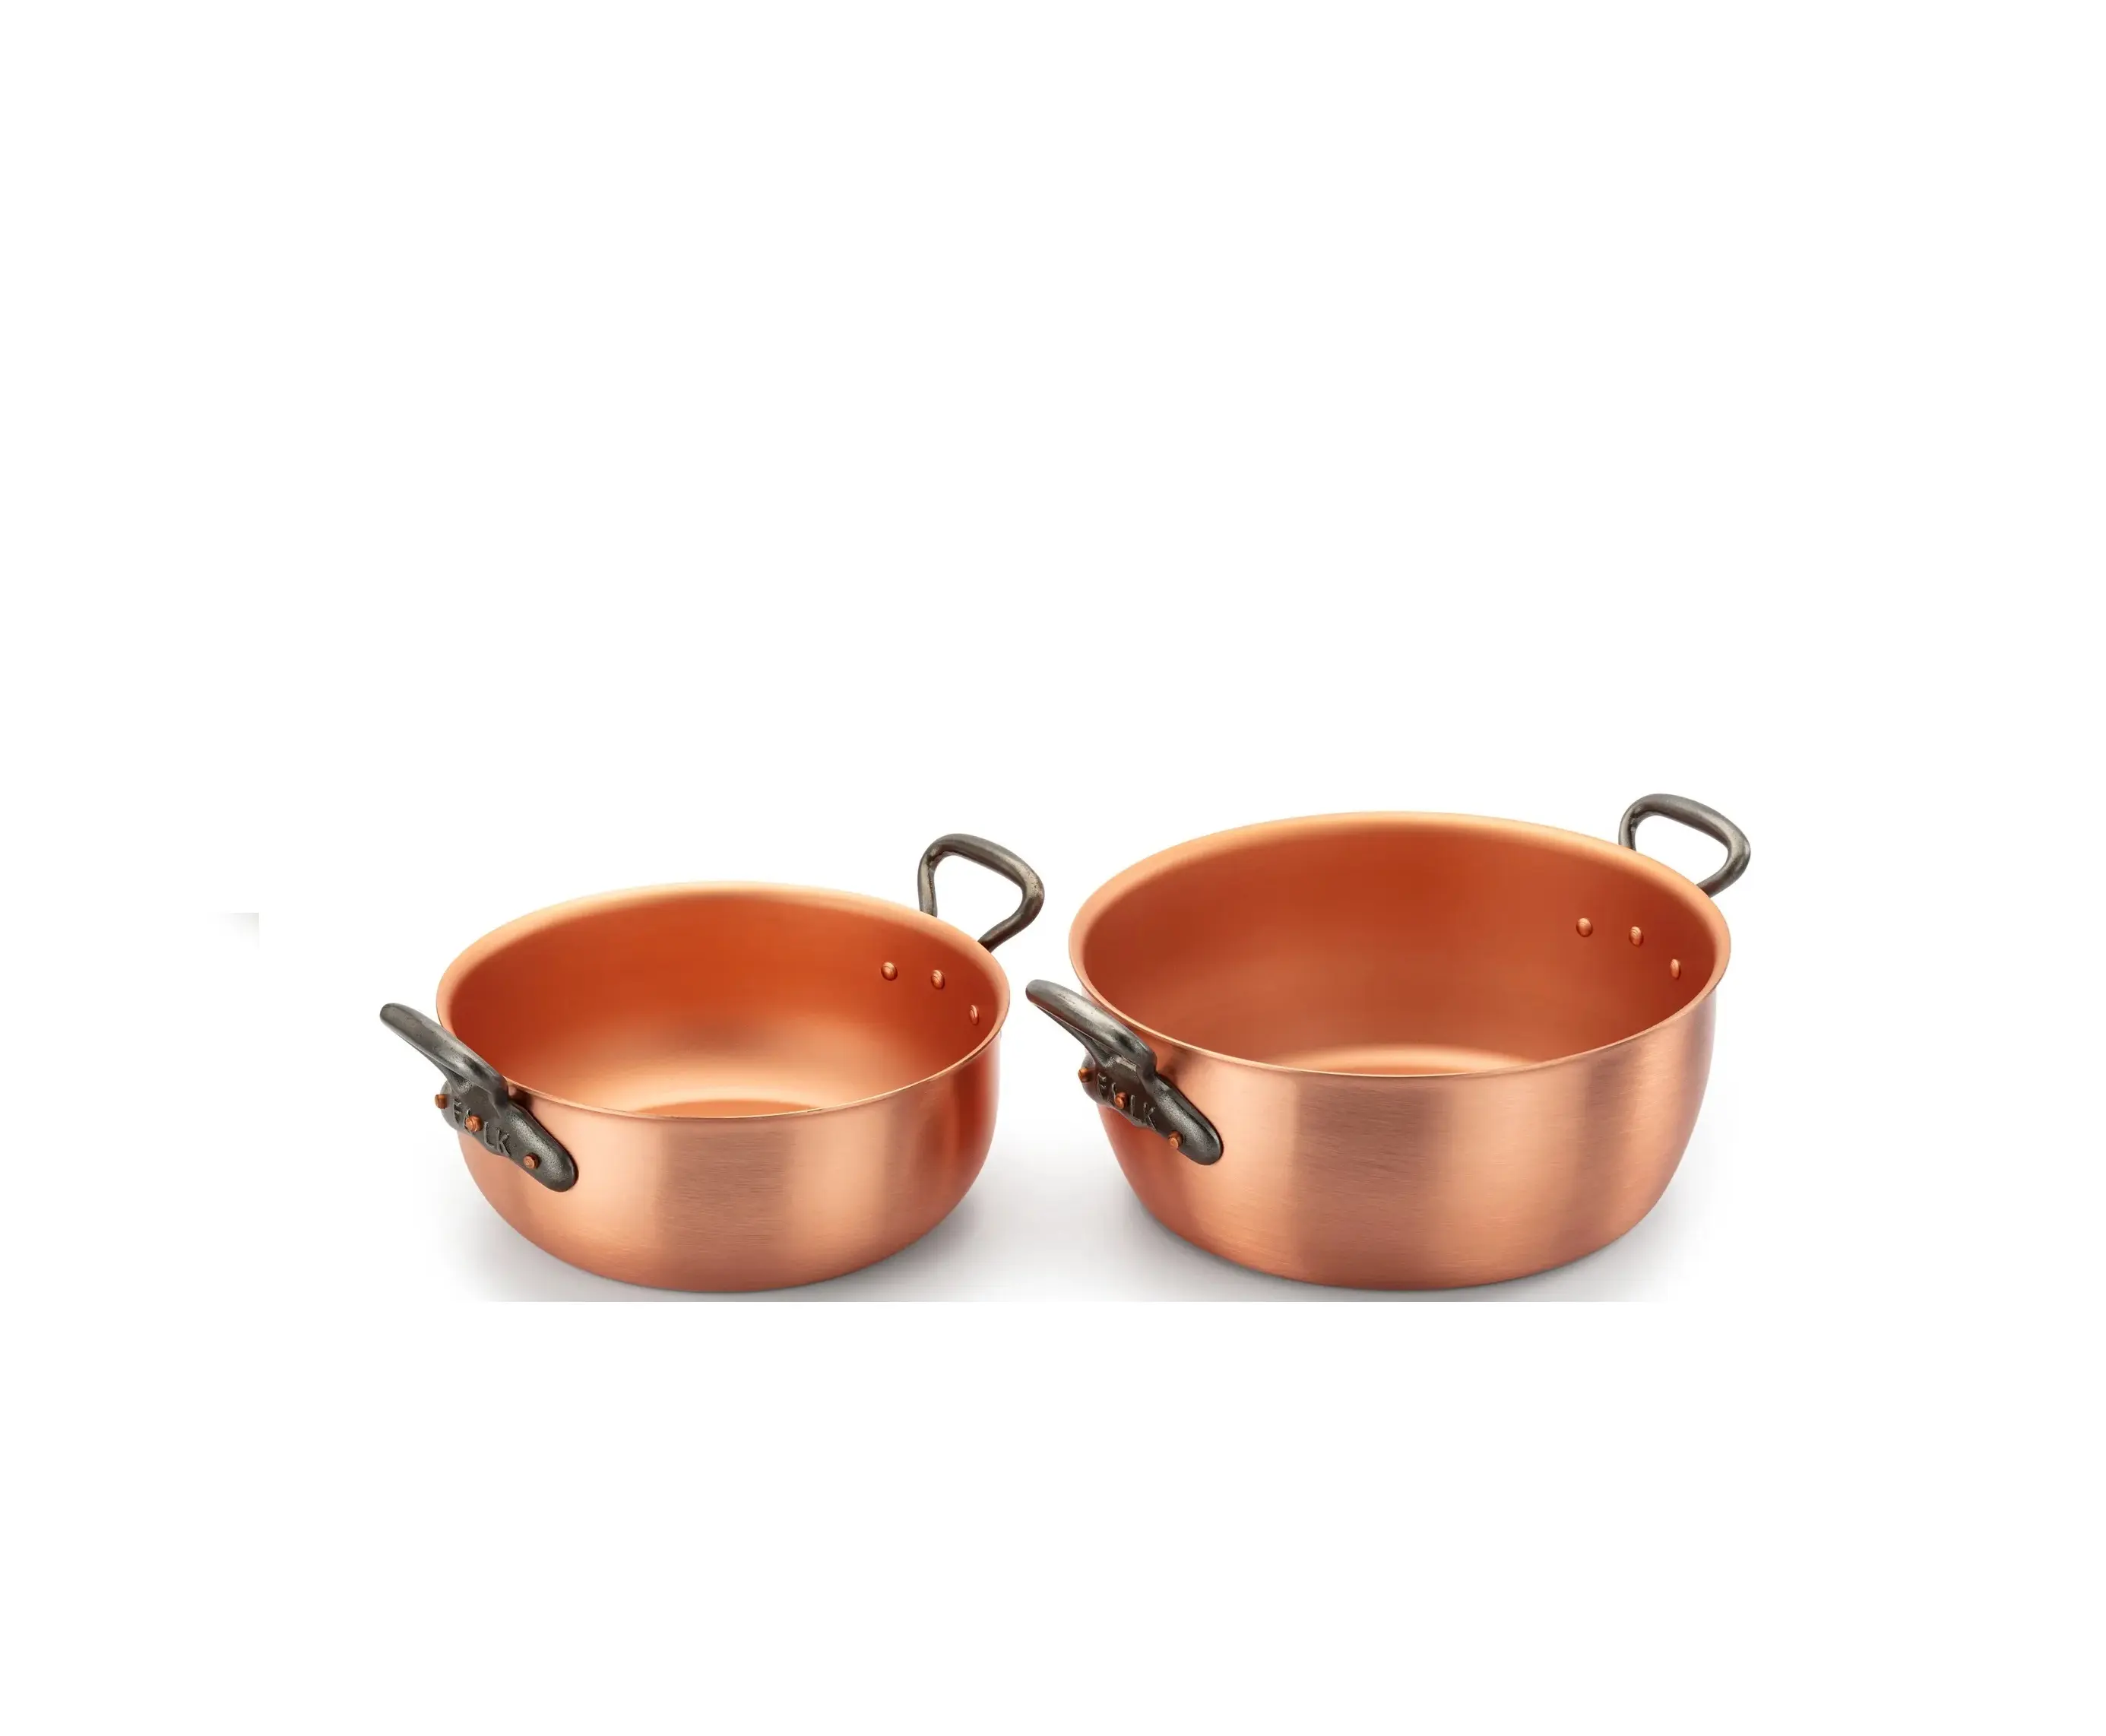 Copper Made High Quality Cooking Pot Set Of 2 Durable Cooking Chafing Dish Buffet Pot With Handles For Kitchen Usage